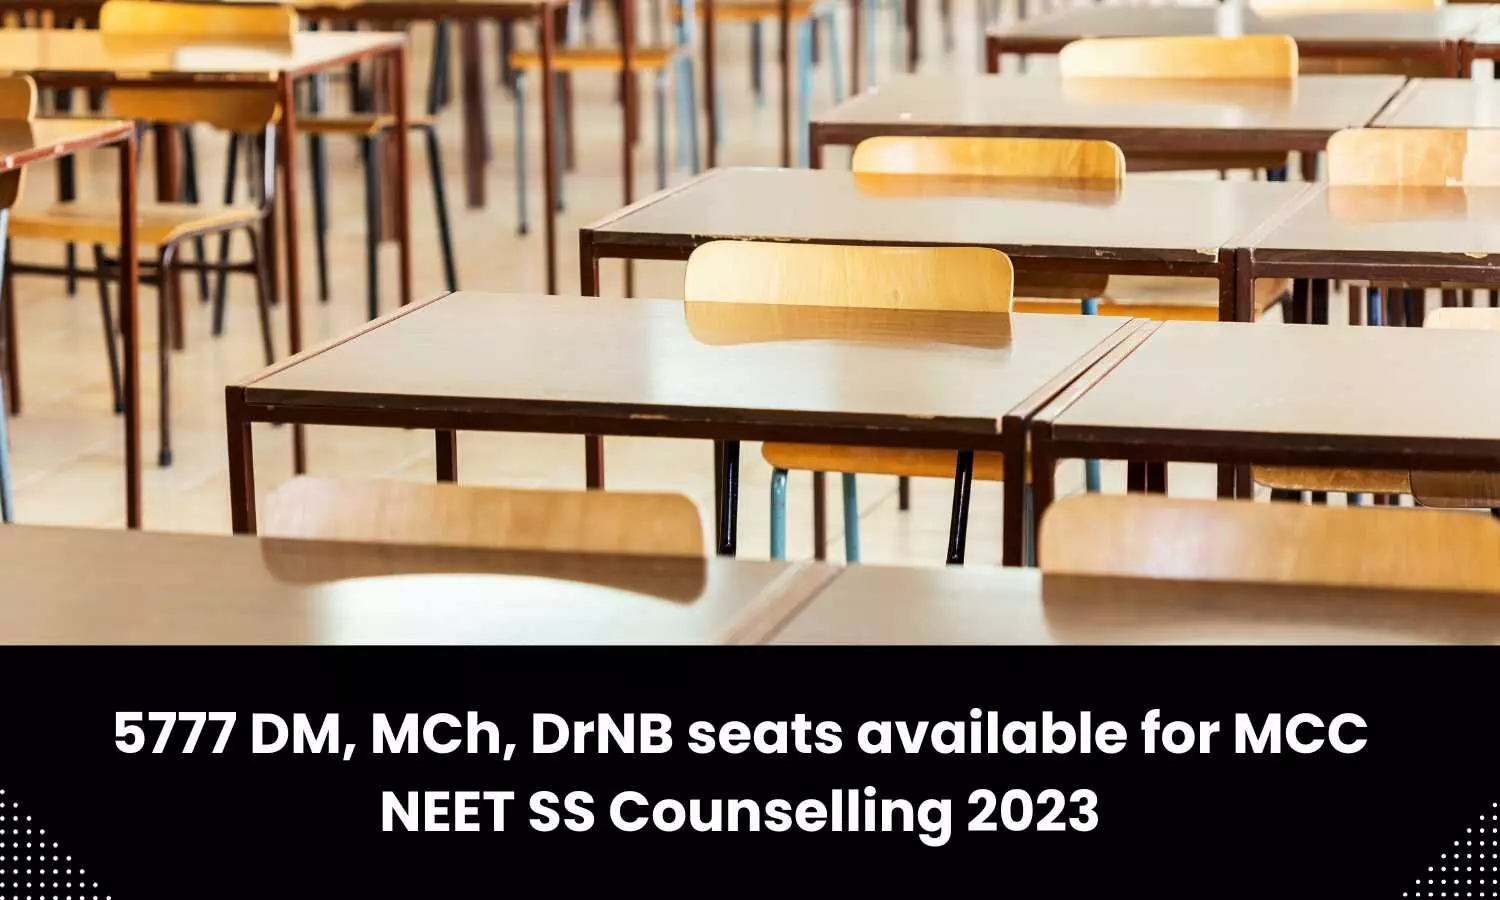 MCC NEET SS Counselling 2023: 5777 DM, MCh, DrNB seats available